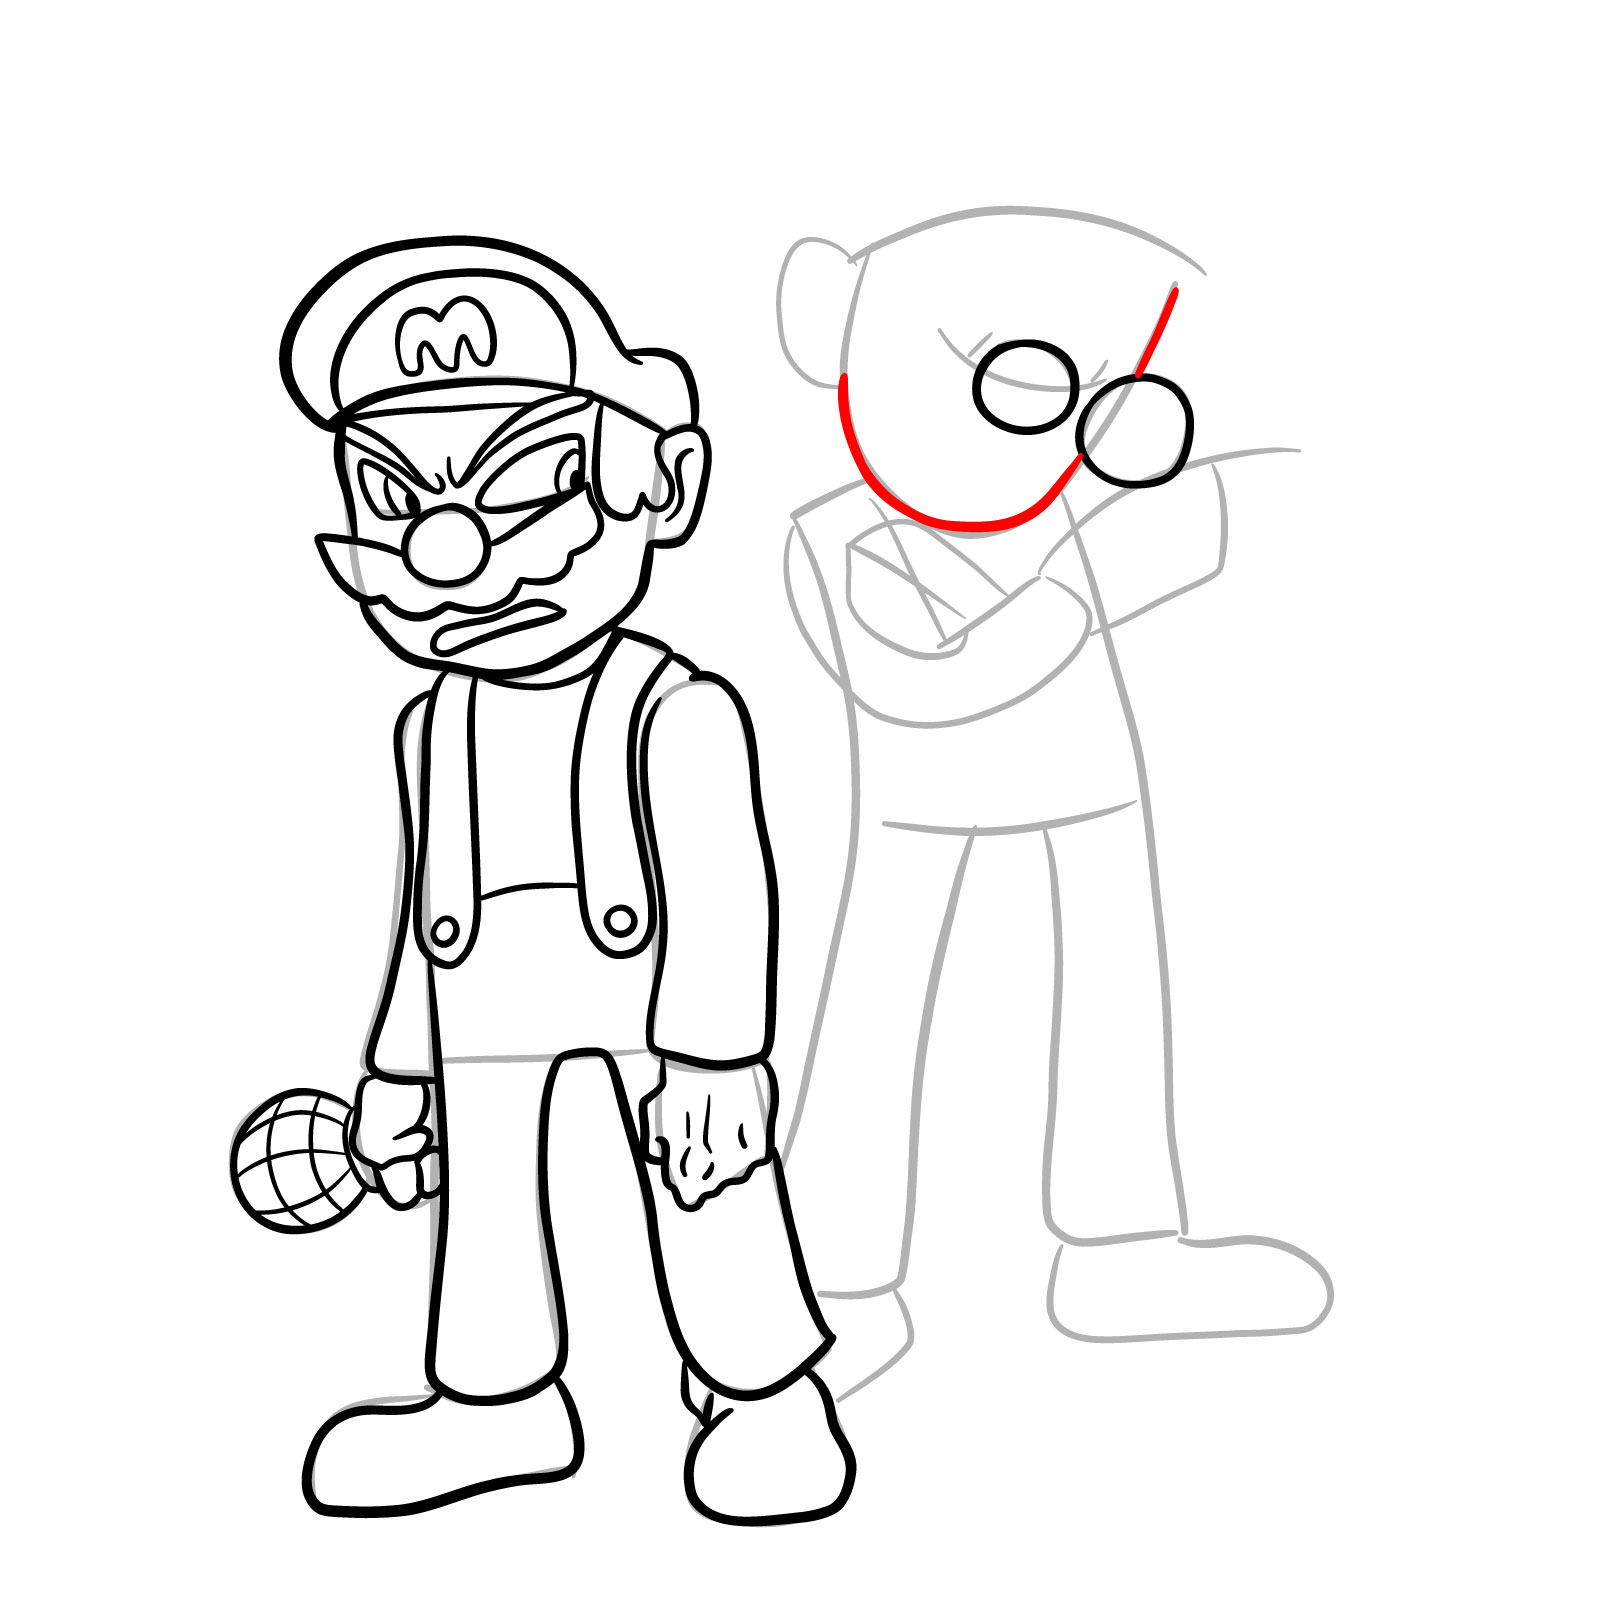 How to draw Mario and Luigi from Tails Gets Trolled - step 25